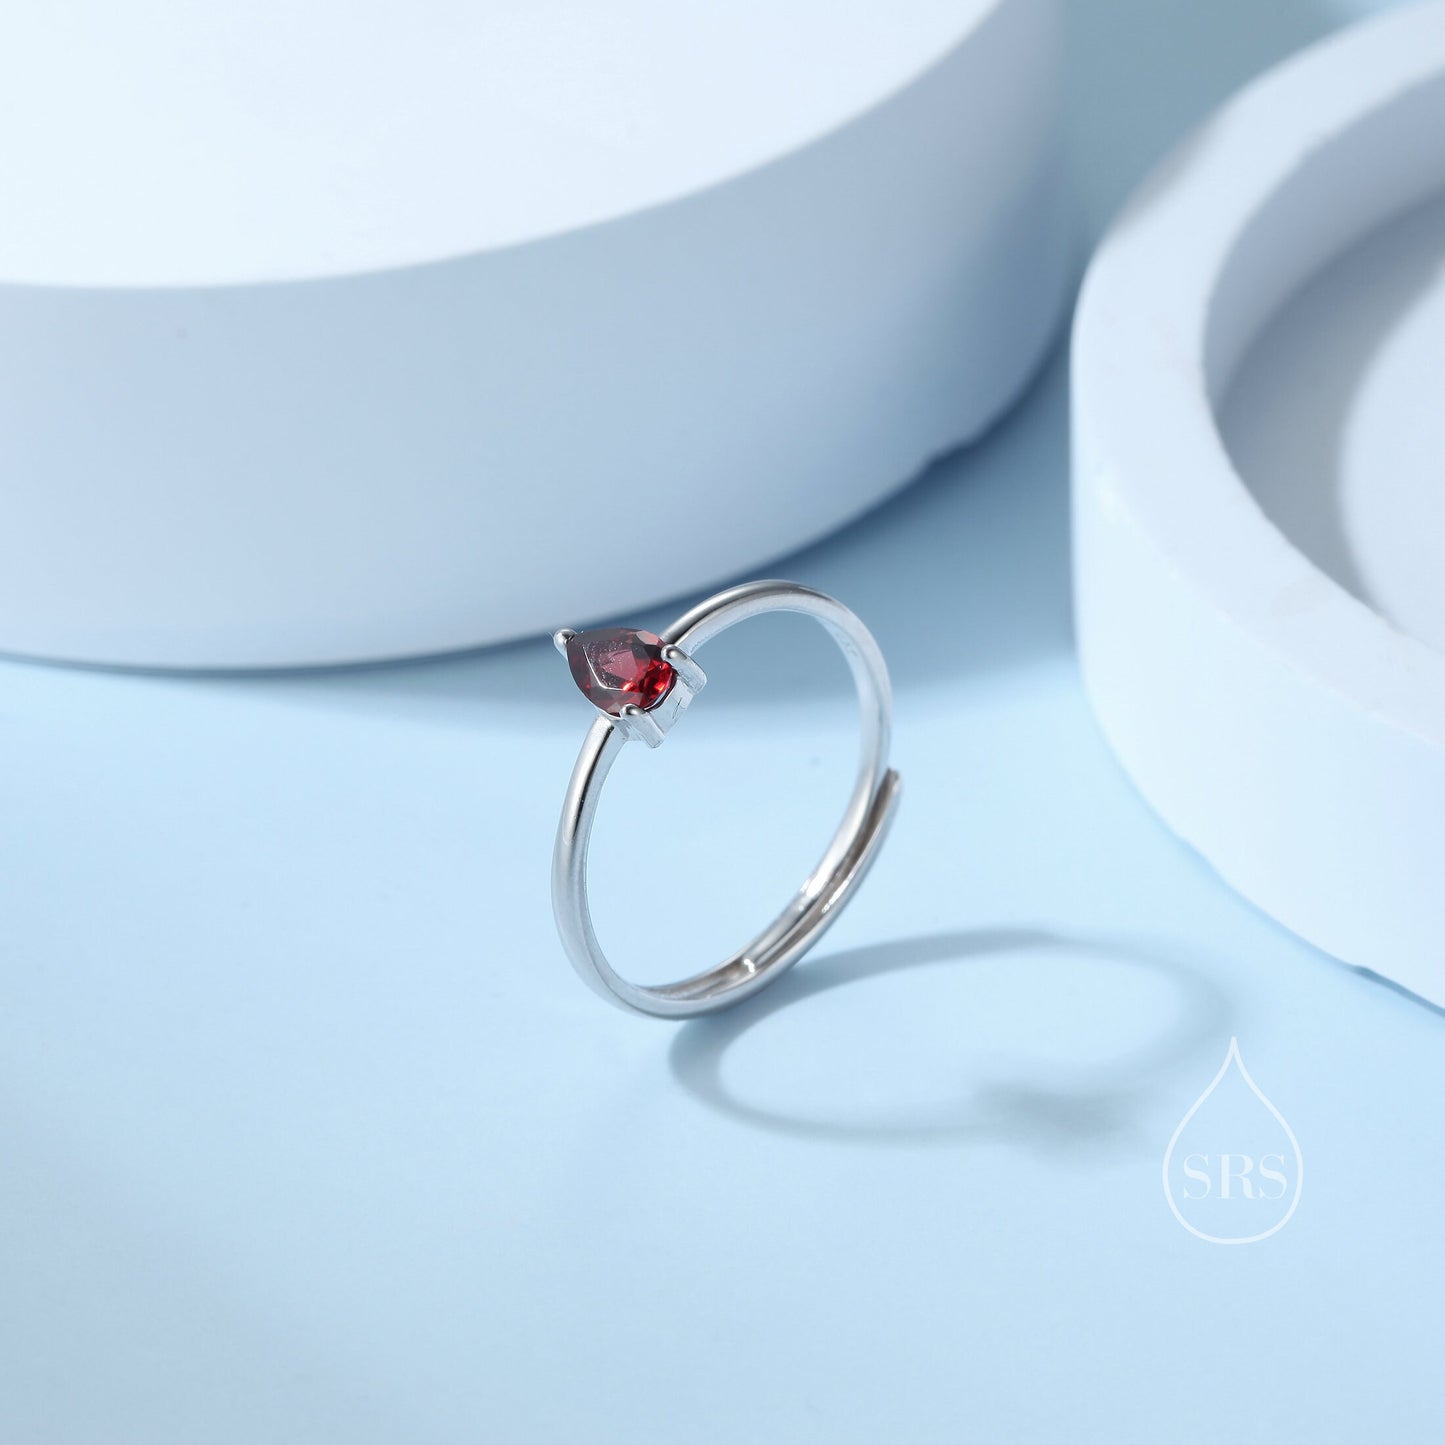 Natural Red Garnet Droplet Ring in Sterling Silver,  4x6mm, Prong Set Pear Cut, Adjustable Size, Genuine Garnet Ring, January Birthstone